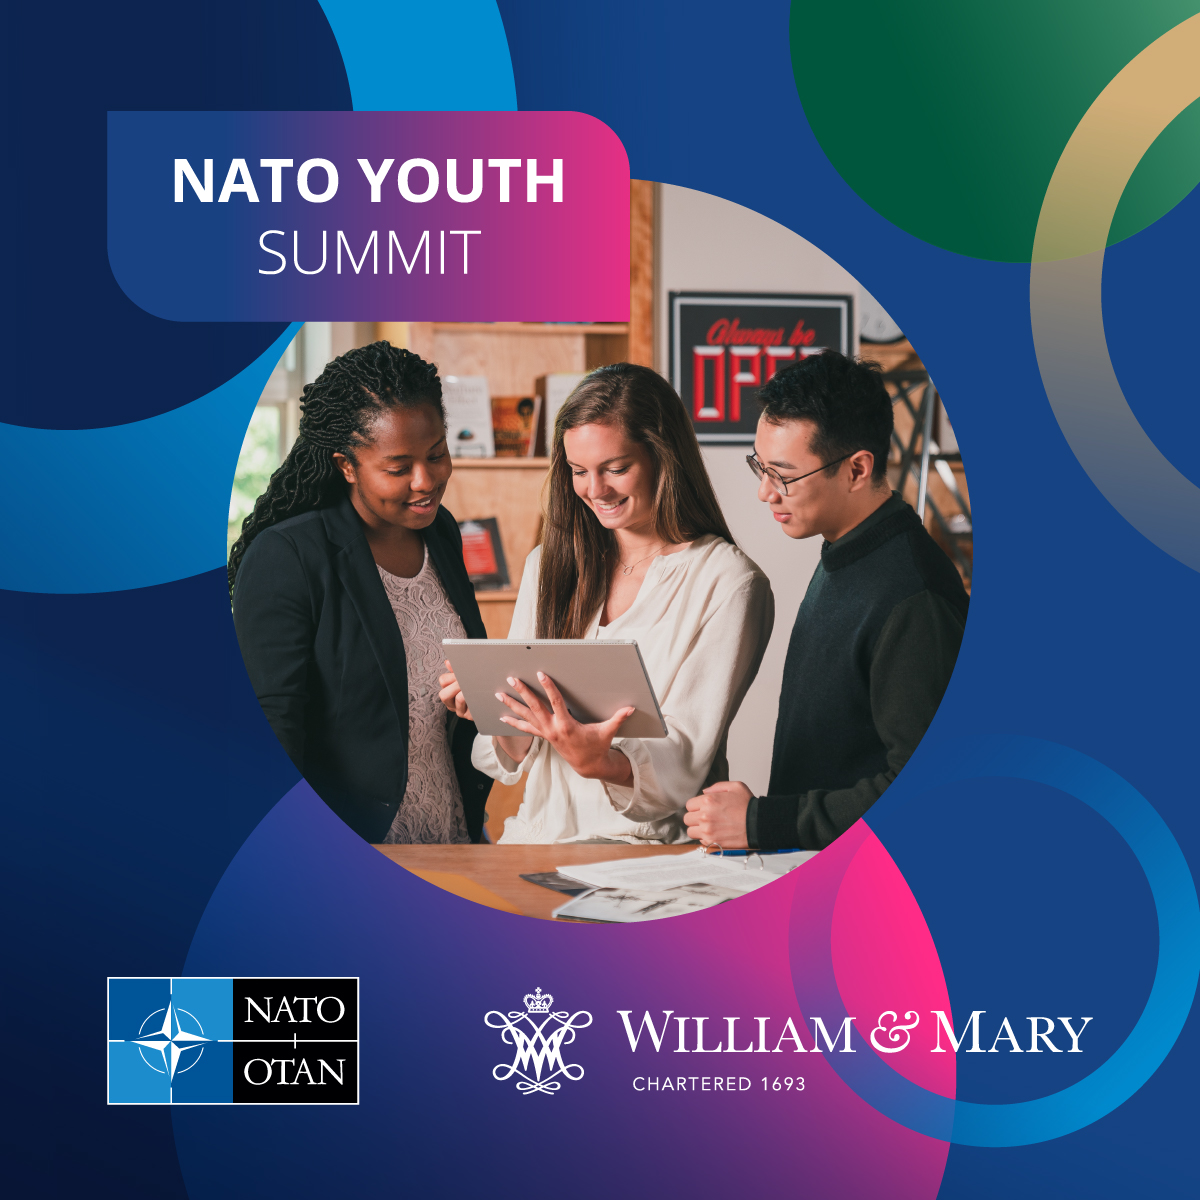 NATO Youth Summit - Three young people engaged in conversation - NATO/OTAN and William &amp; Mary